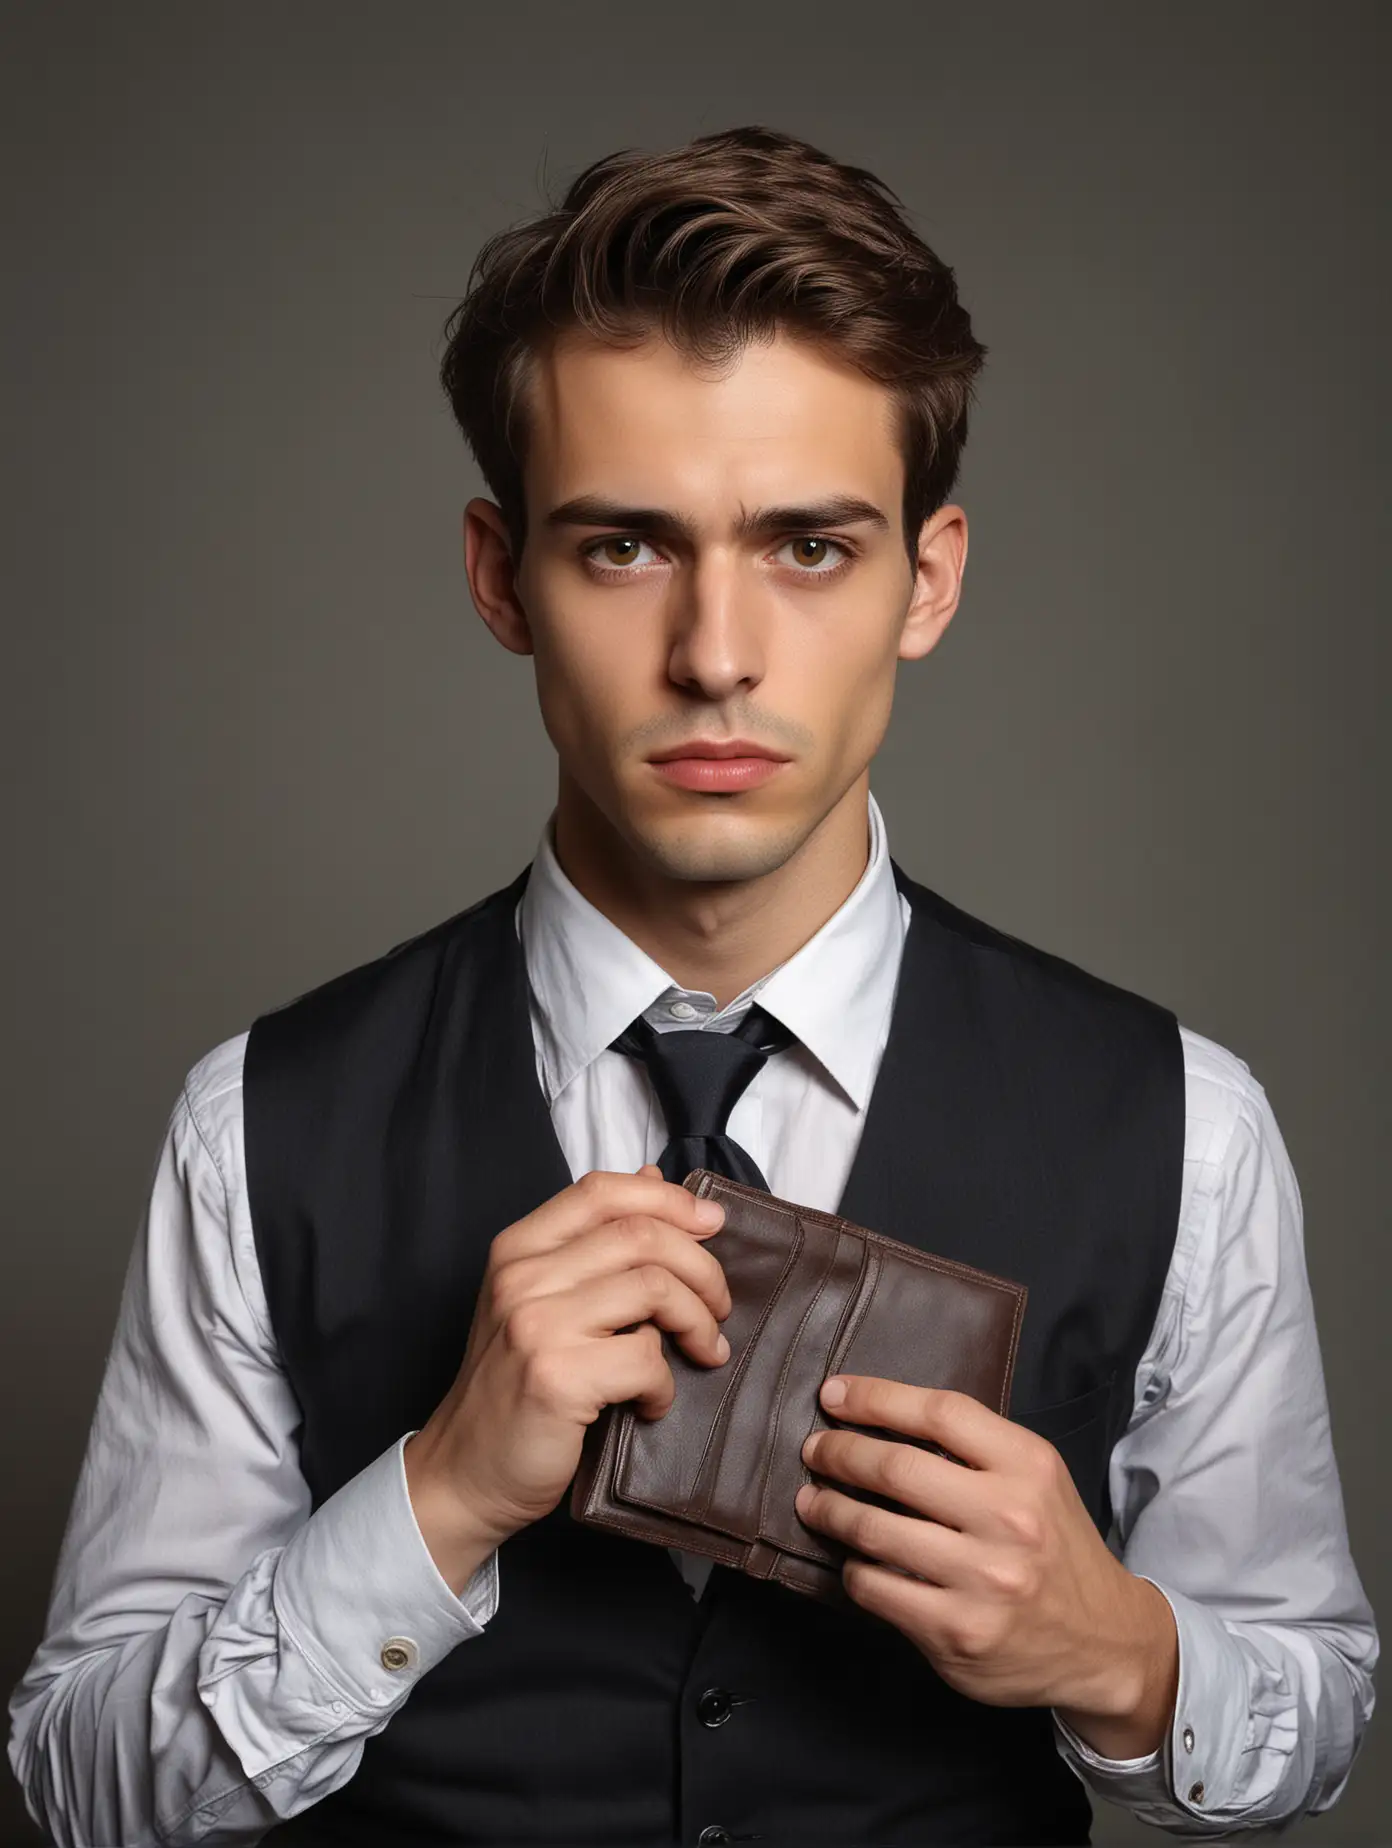 Frustrated Young Businessman Holding Empty Wallet Portrait